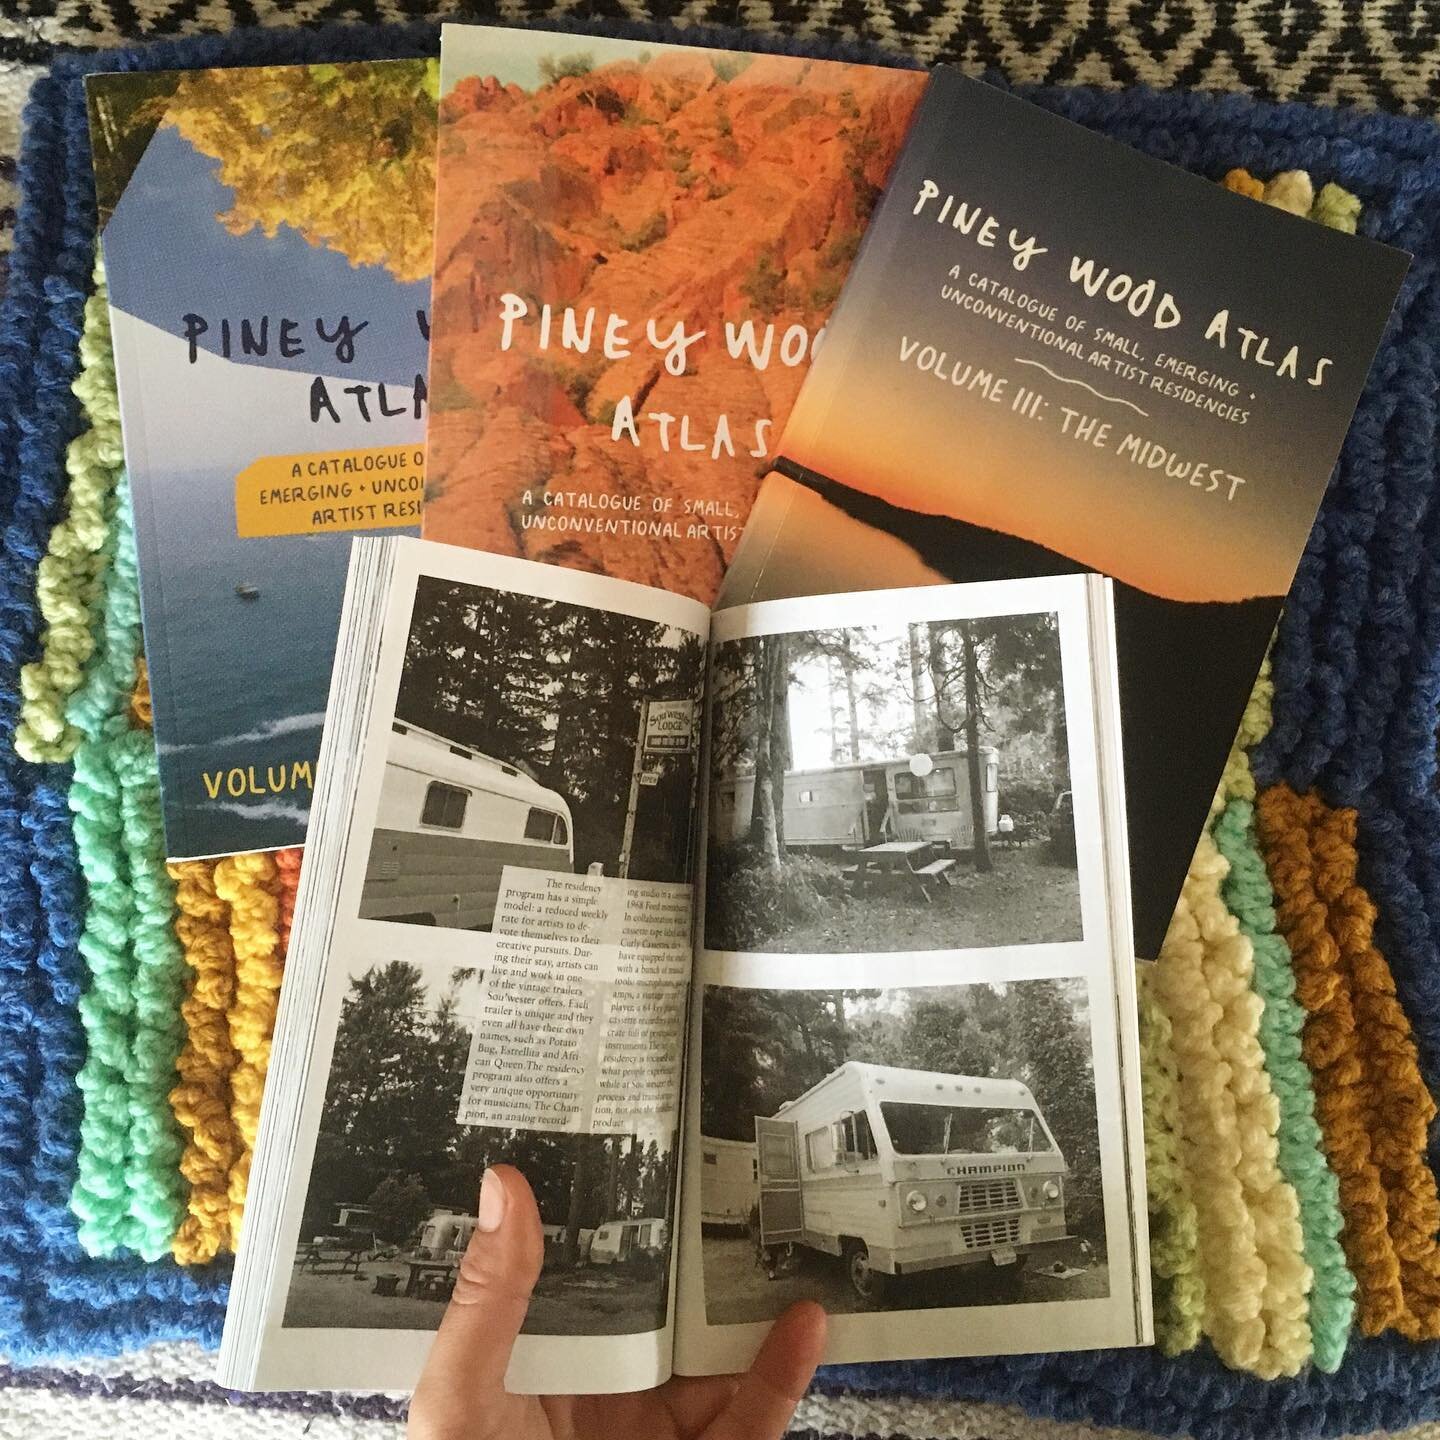 Happy holiday season! If you&rsquo;ve got some adventurous, creative spirits on your list, consider gifting them a Piney Wood Atlas book! We have four to choose from (or get them all!) covering small and alternative residencies in different regions o